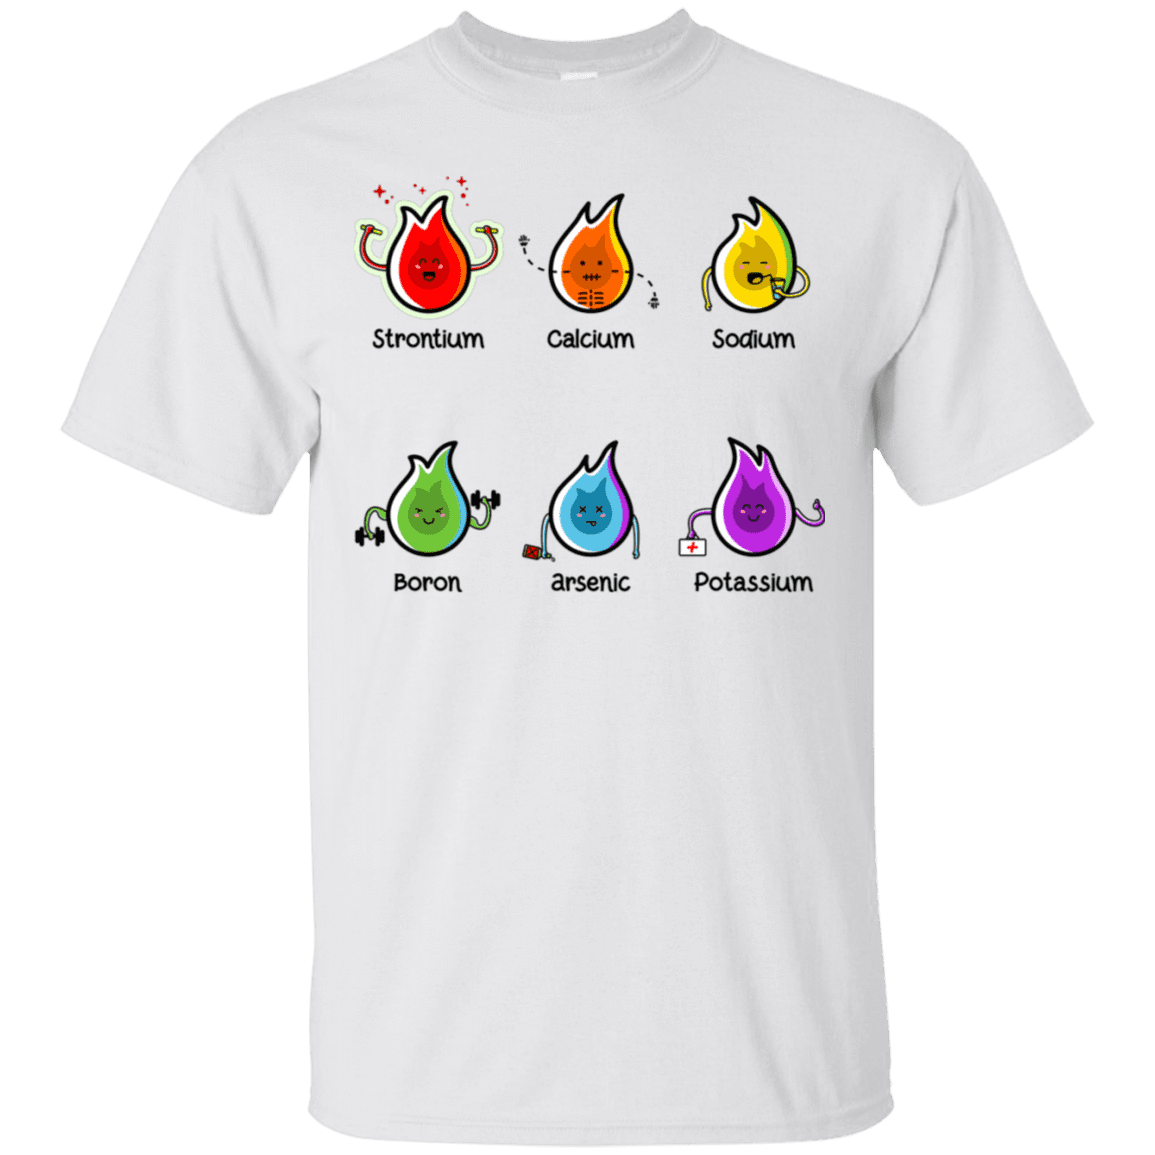 T-Shirts White / S Flaming Elements Science T-Shirt